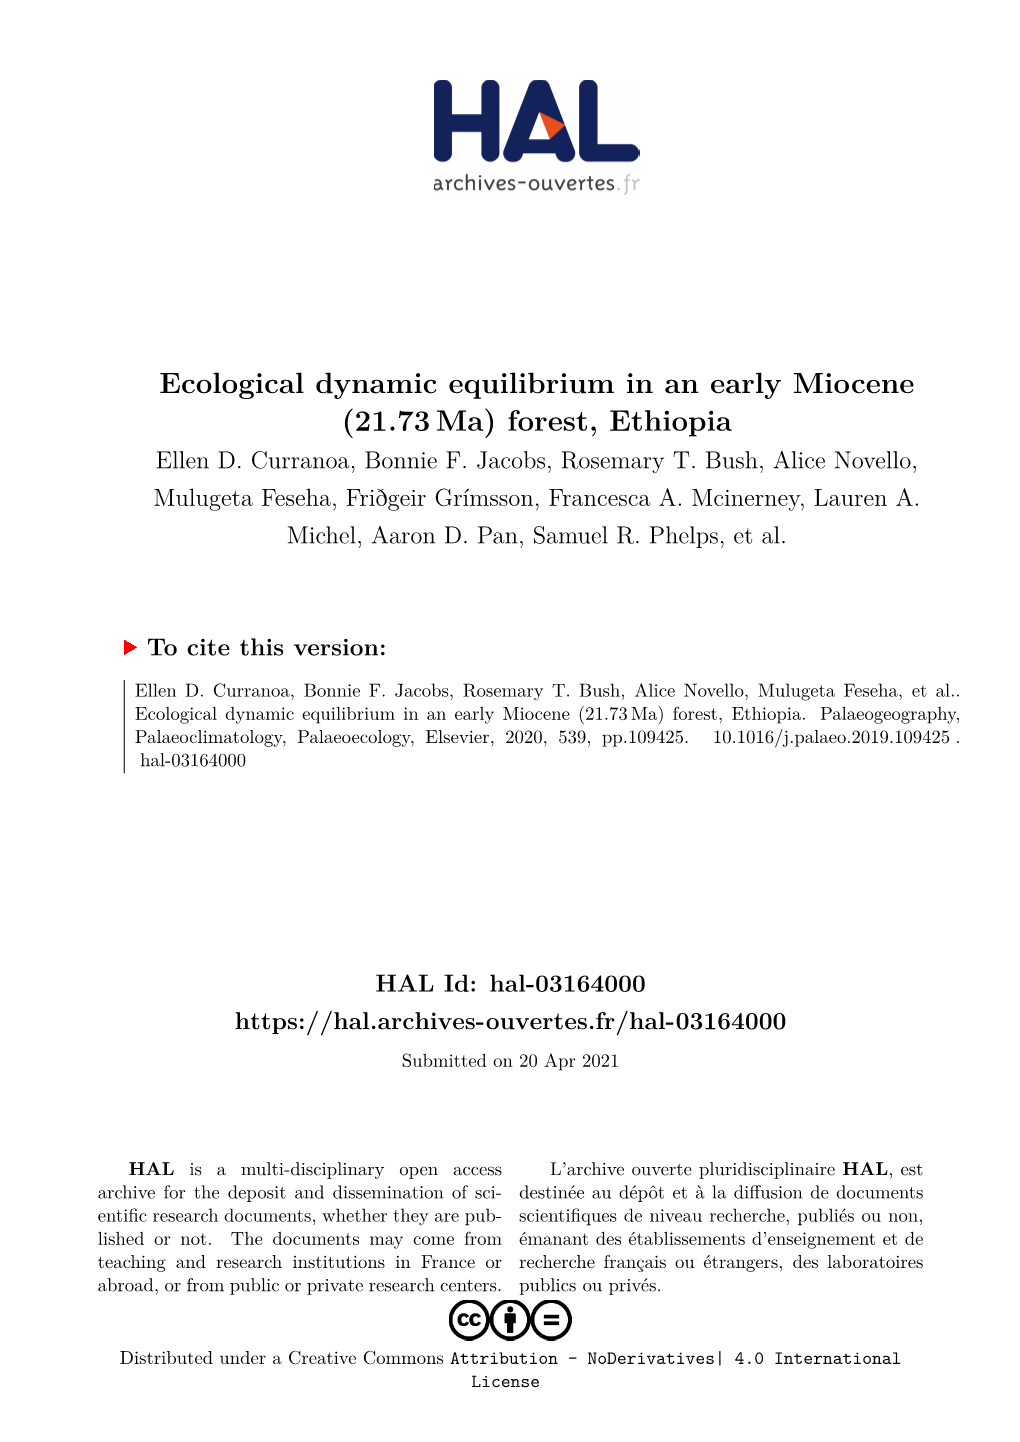 Ecological Dynamic Equilibrium in an Early Miocene (21.73 Ma) Forest, Ethiopia Ellen D